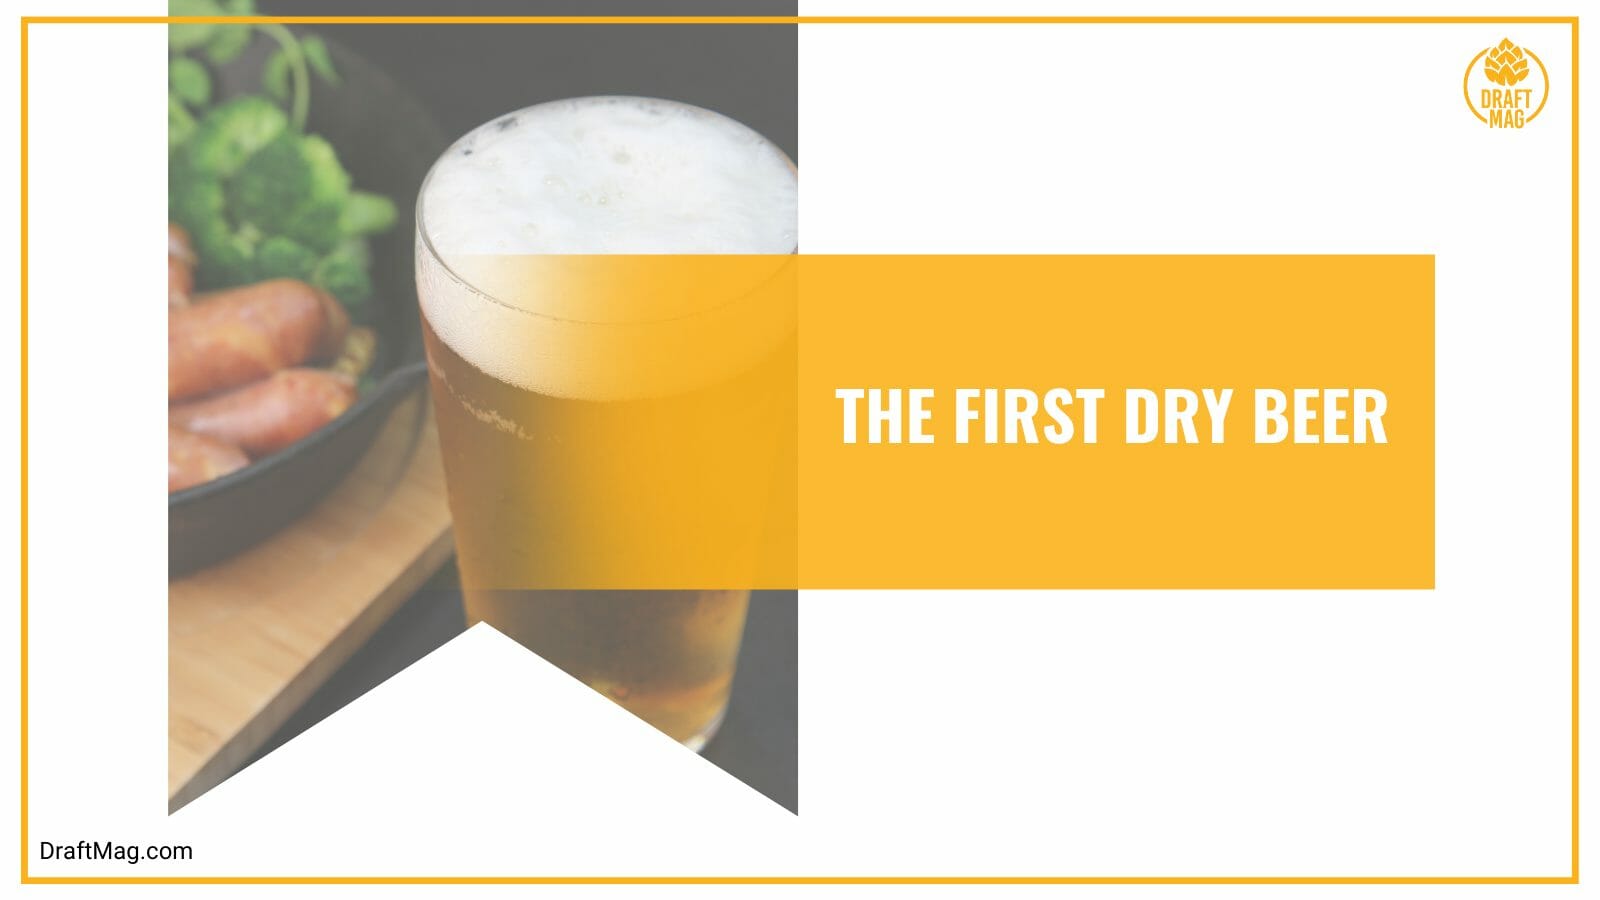 The first dry beer